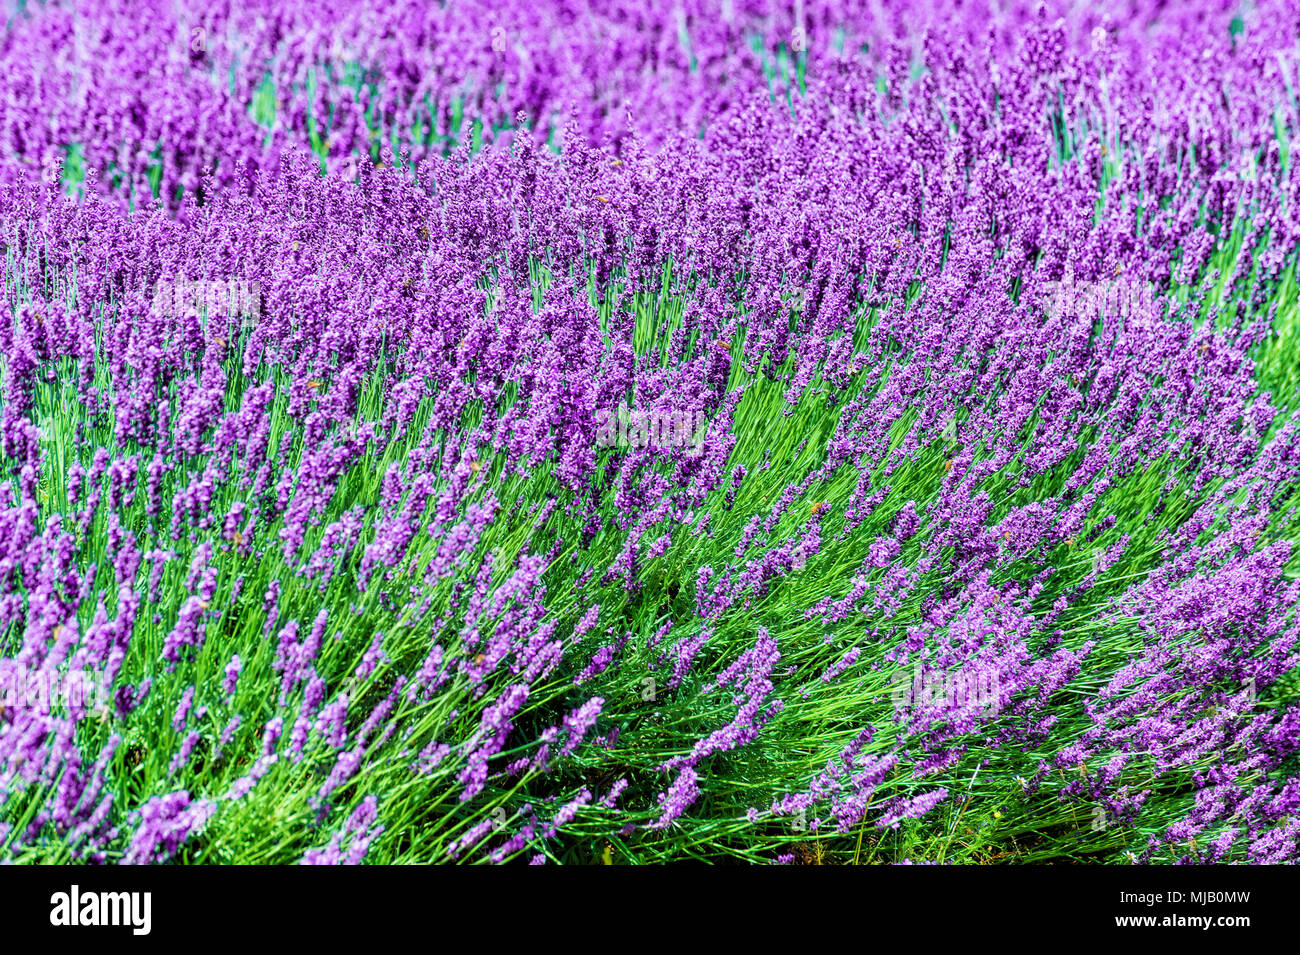 A field of full blooming lavender plants Stock Photo